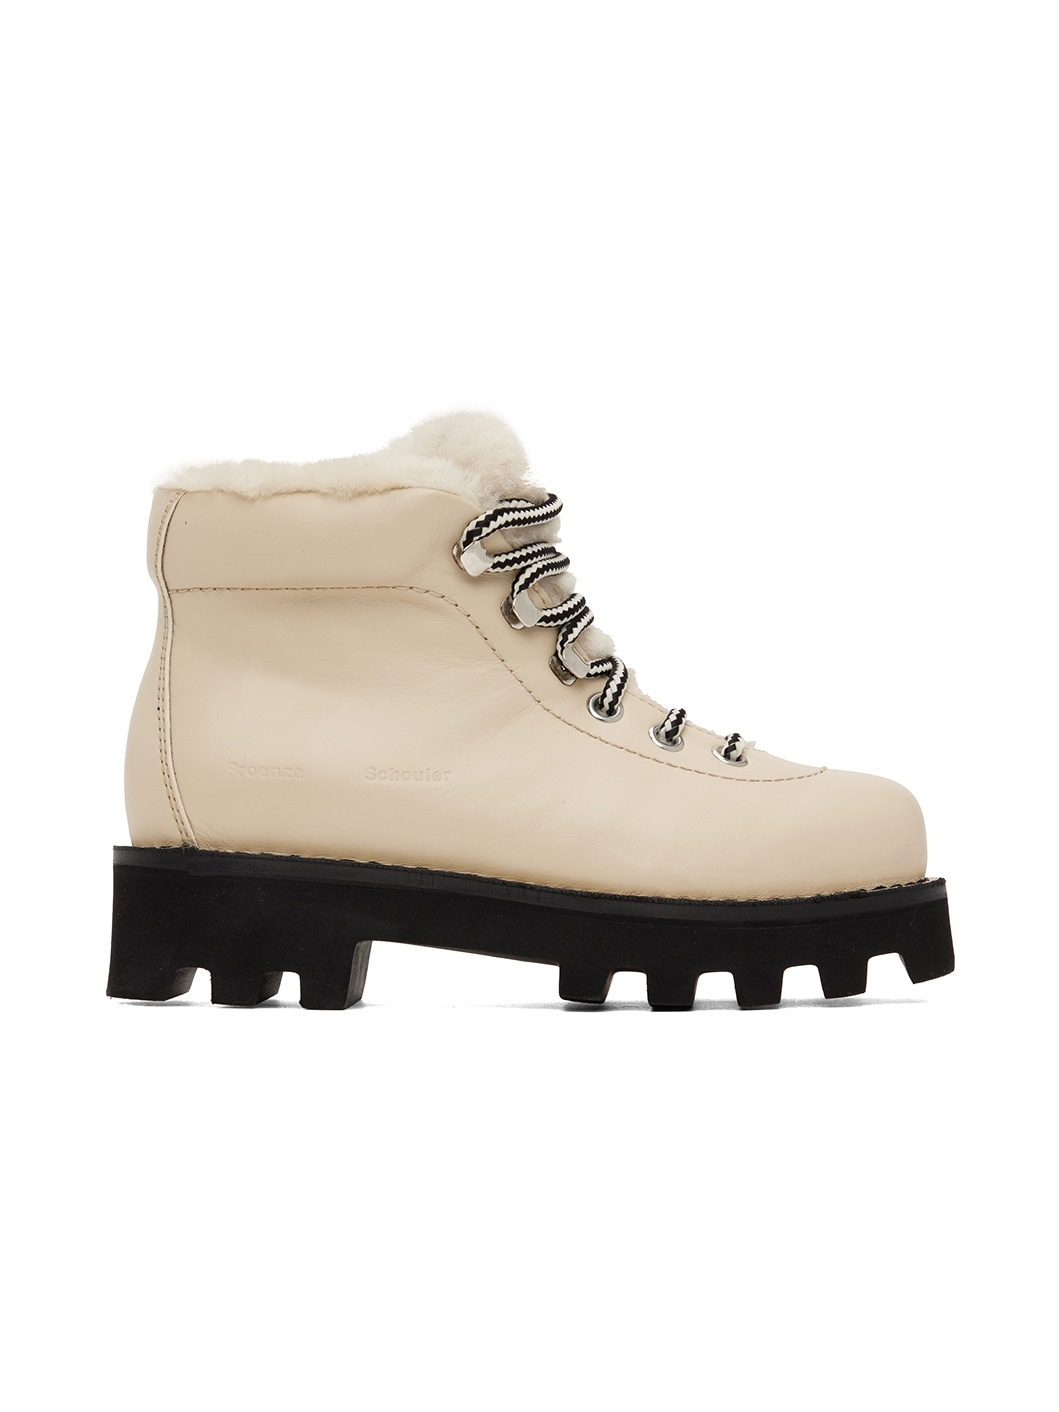 Beige Shearling Hiking Boots - 1